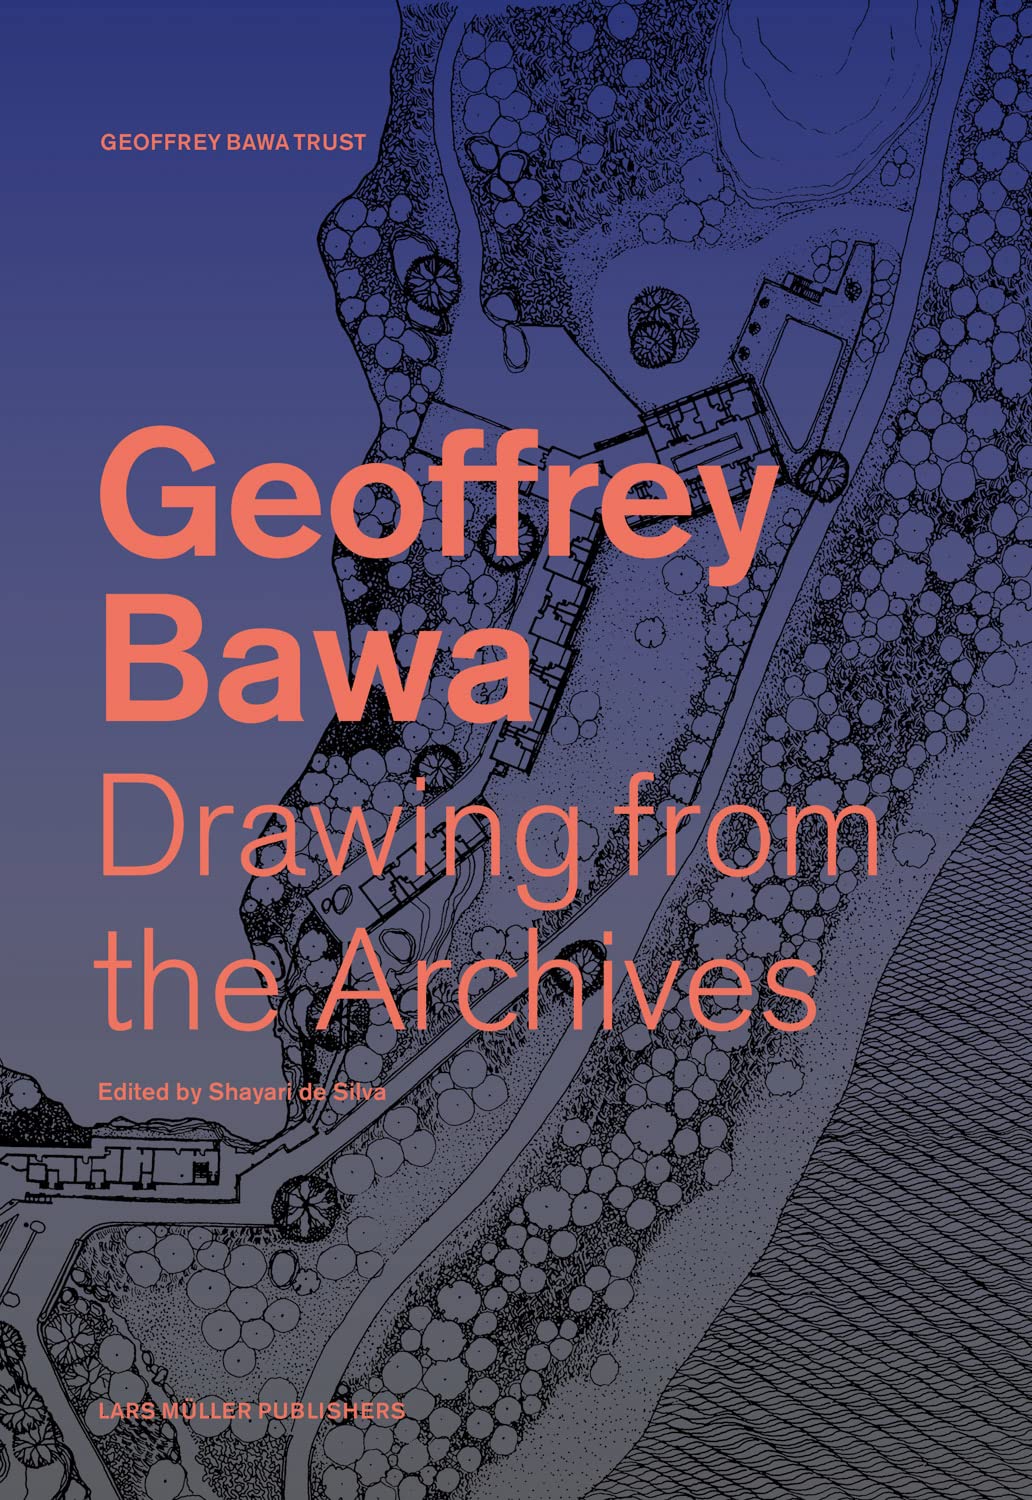 GEOFFREY BAWA DRAWING FROM THE ARCHIVES